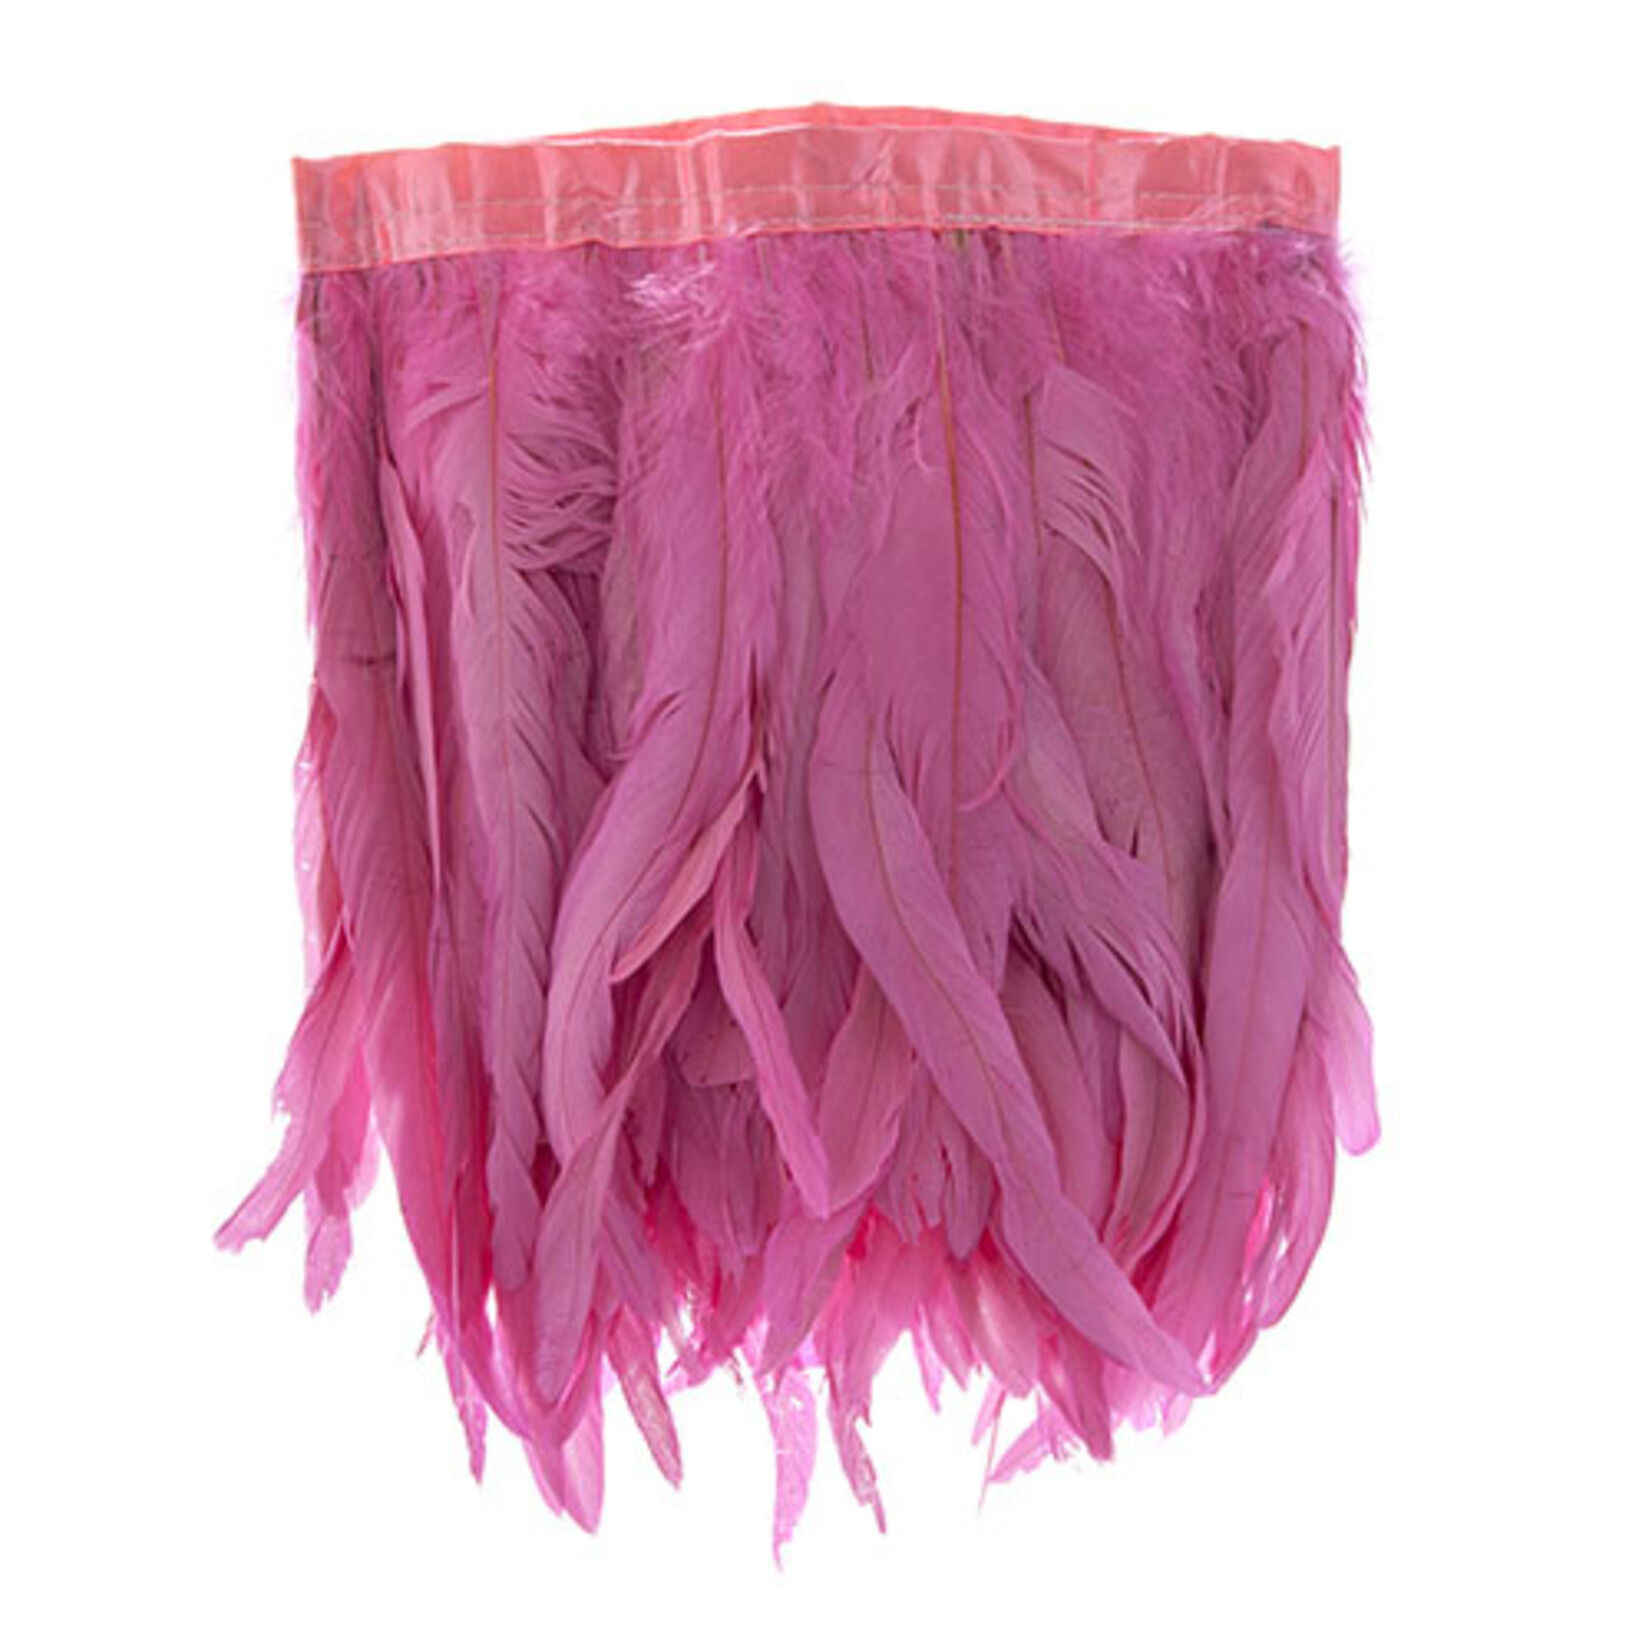 Coque Feathers Value 8-10 Inches 1 Yard  Cotton Candy